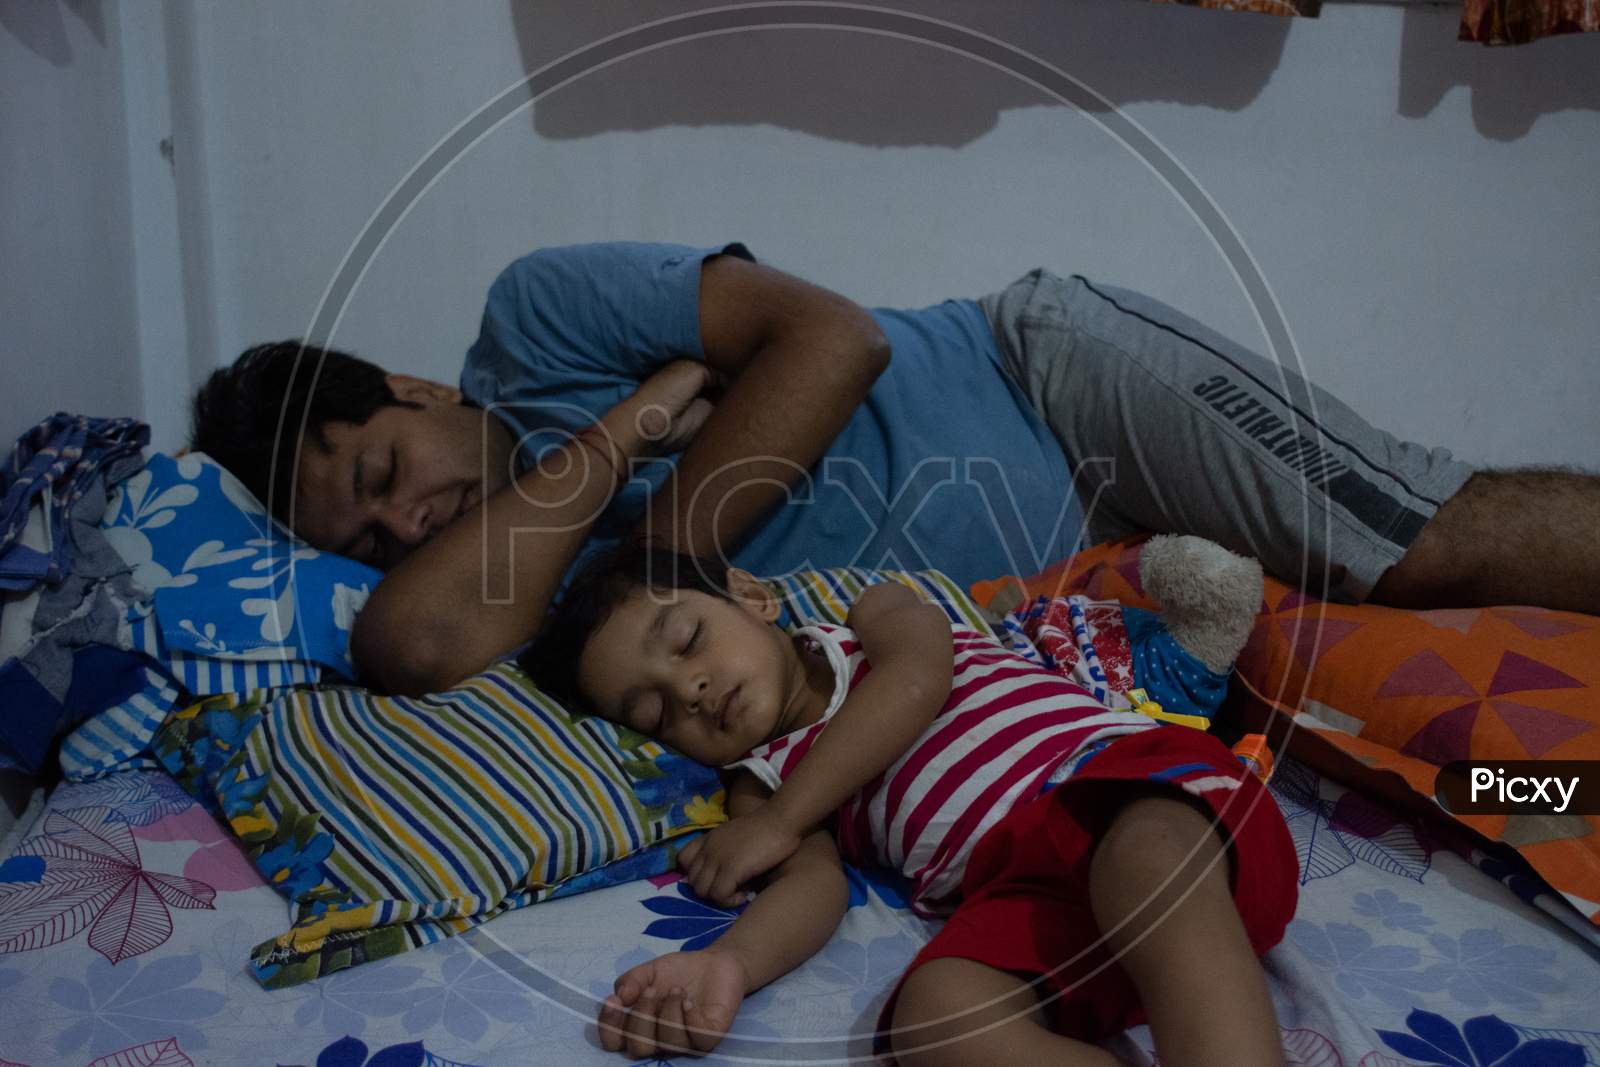 father and son sleeping together in same style. Indian family